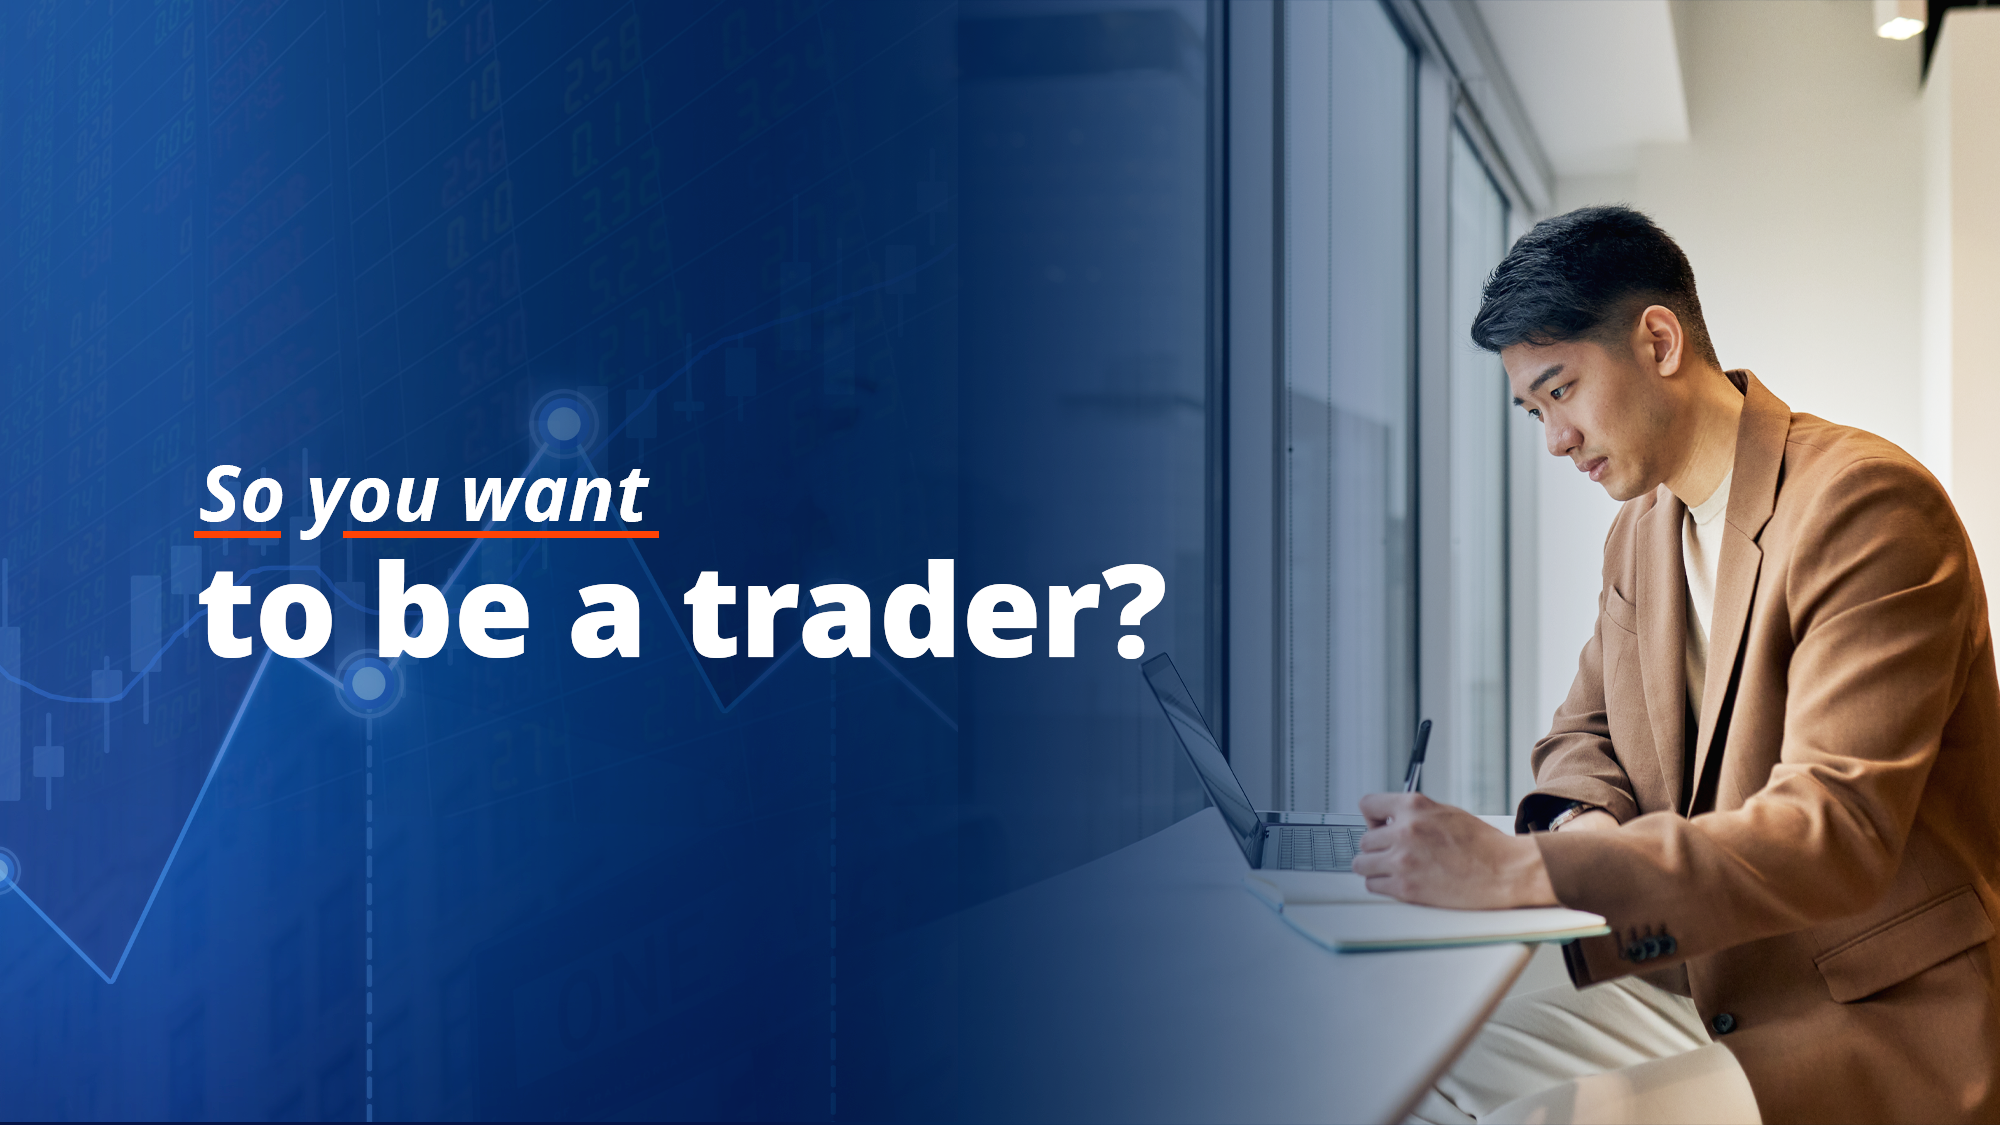 So you want to be a trader?